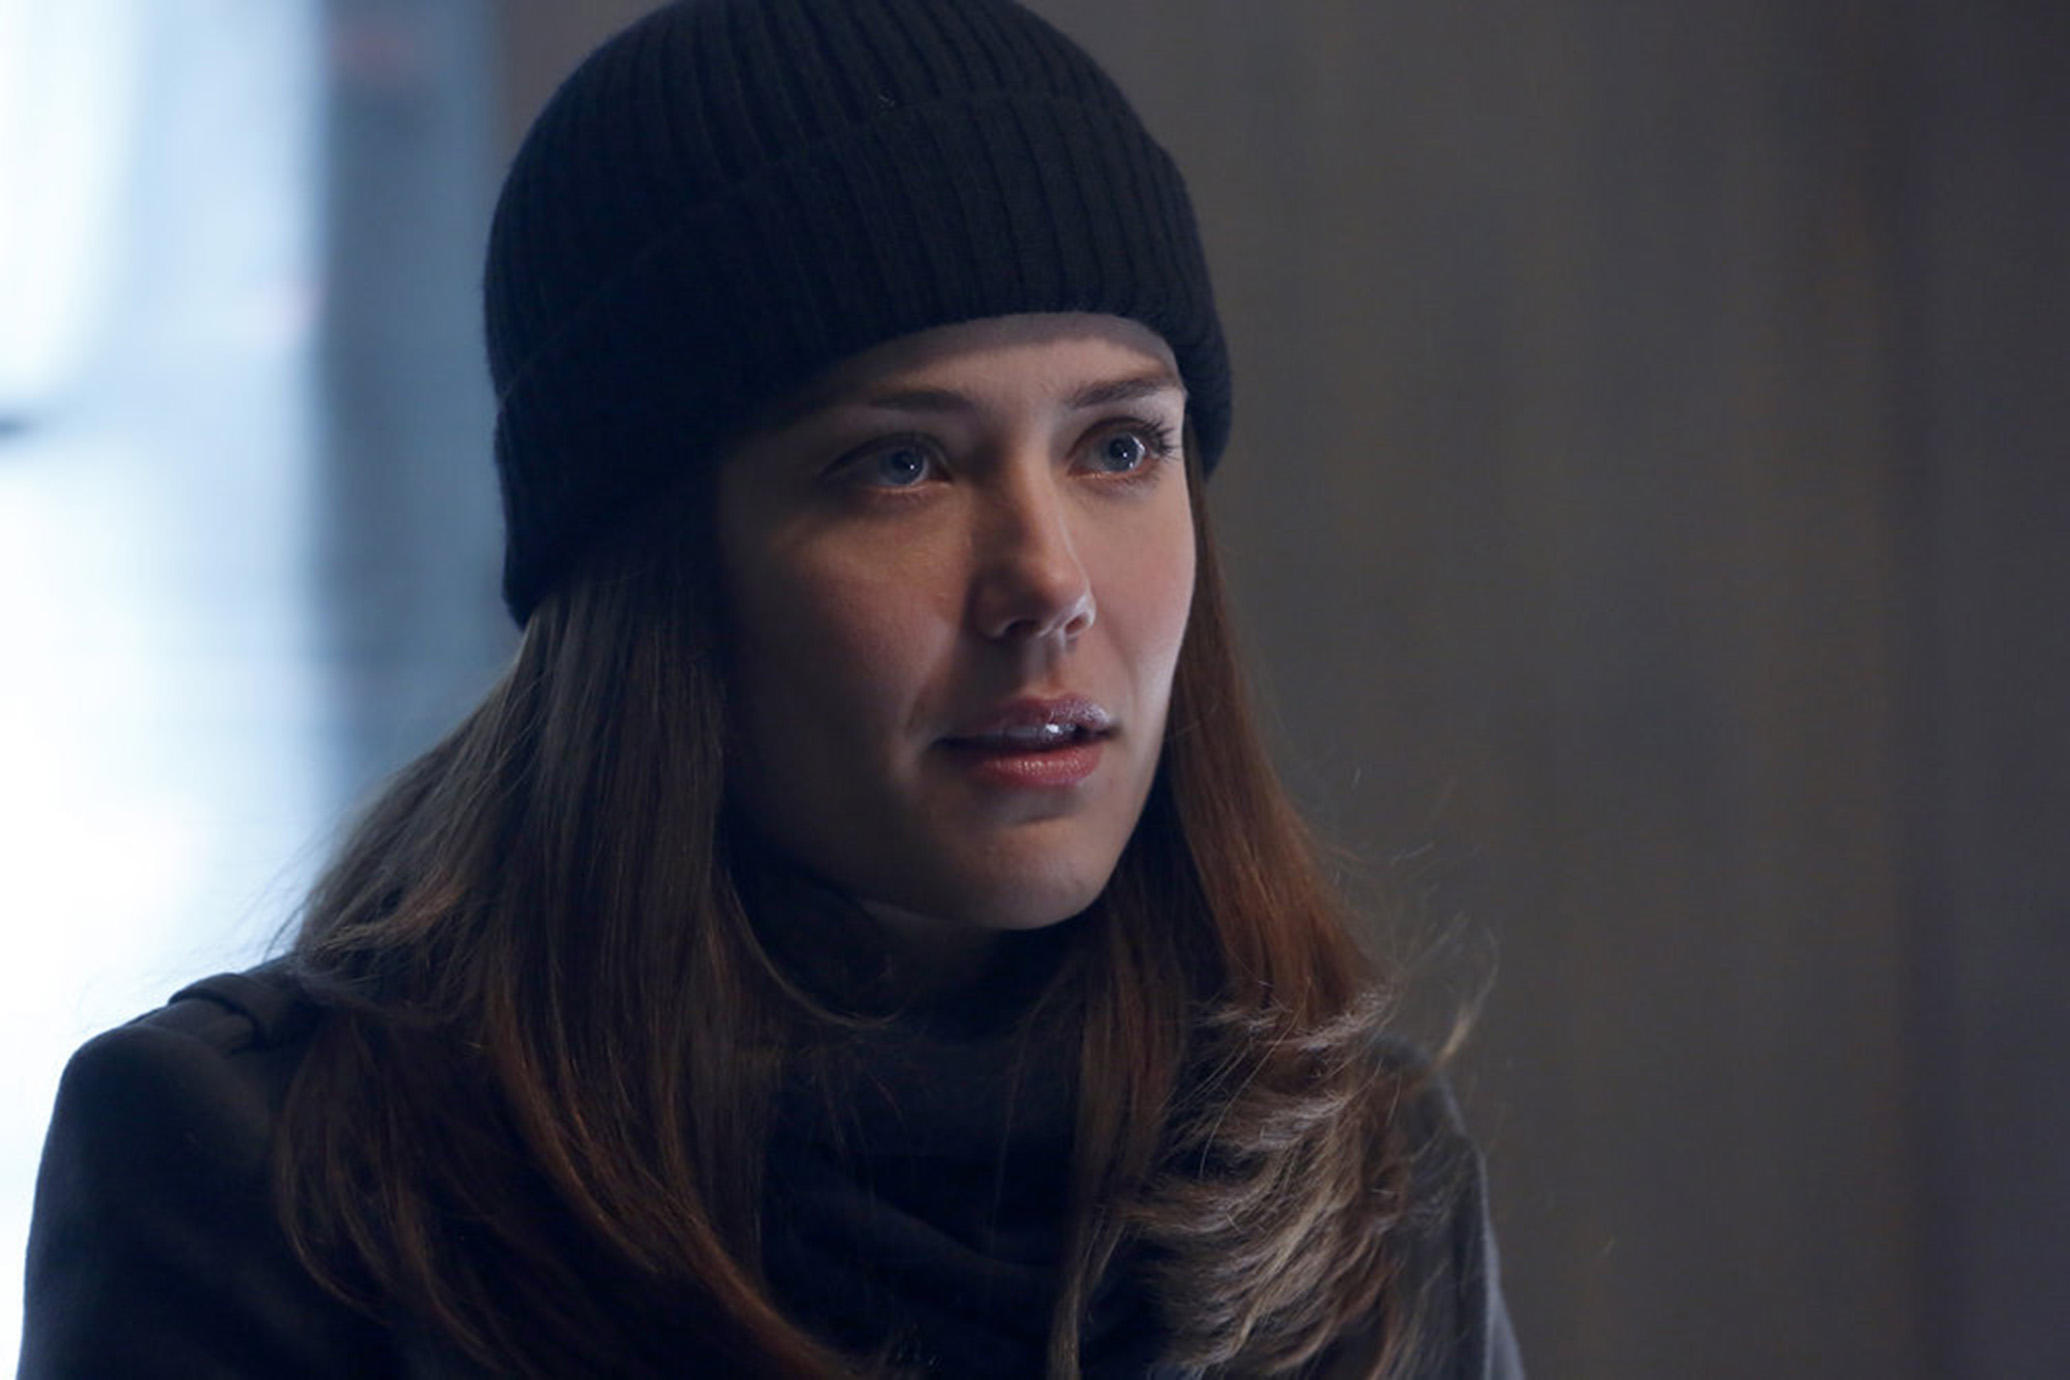 THE BLACKLIST -- "The Capricorn Killer" Episode 516 -- Pictured: Megan Boone as Elizabeth Keen -- (Photo by: Will Hart/NBC)